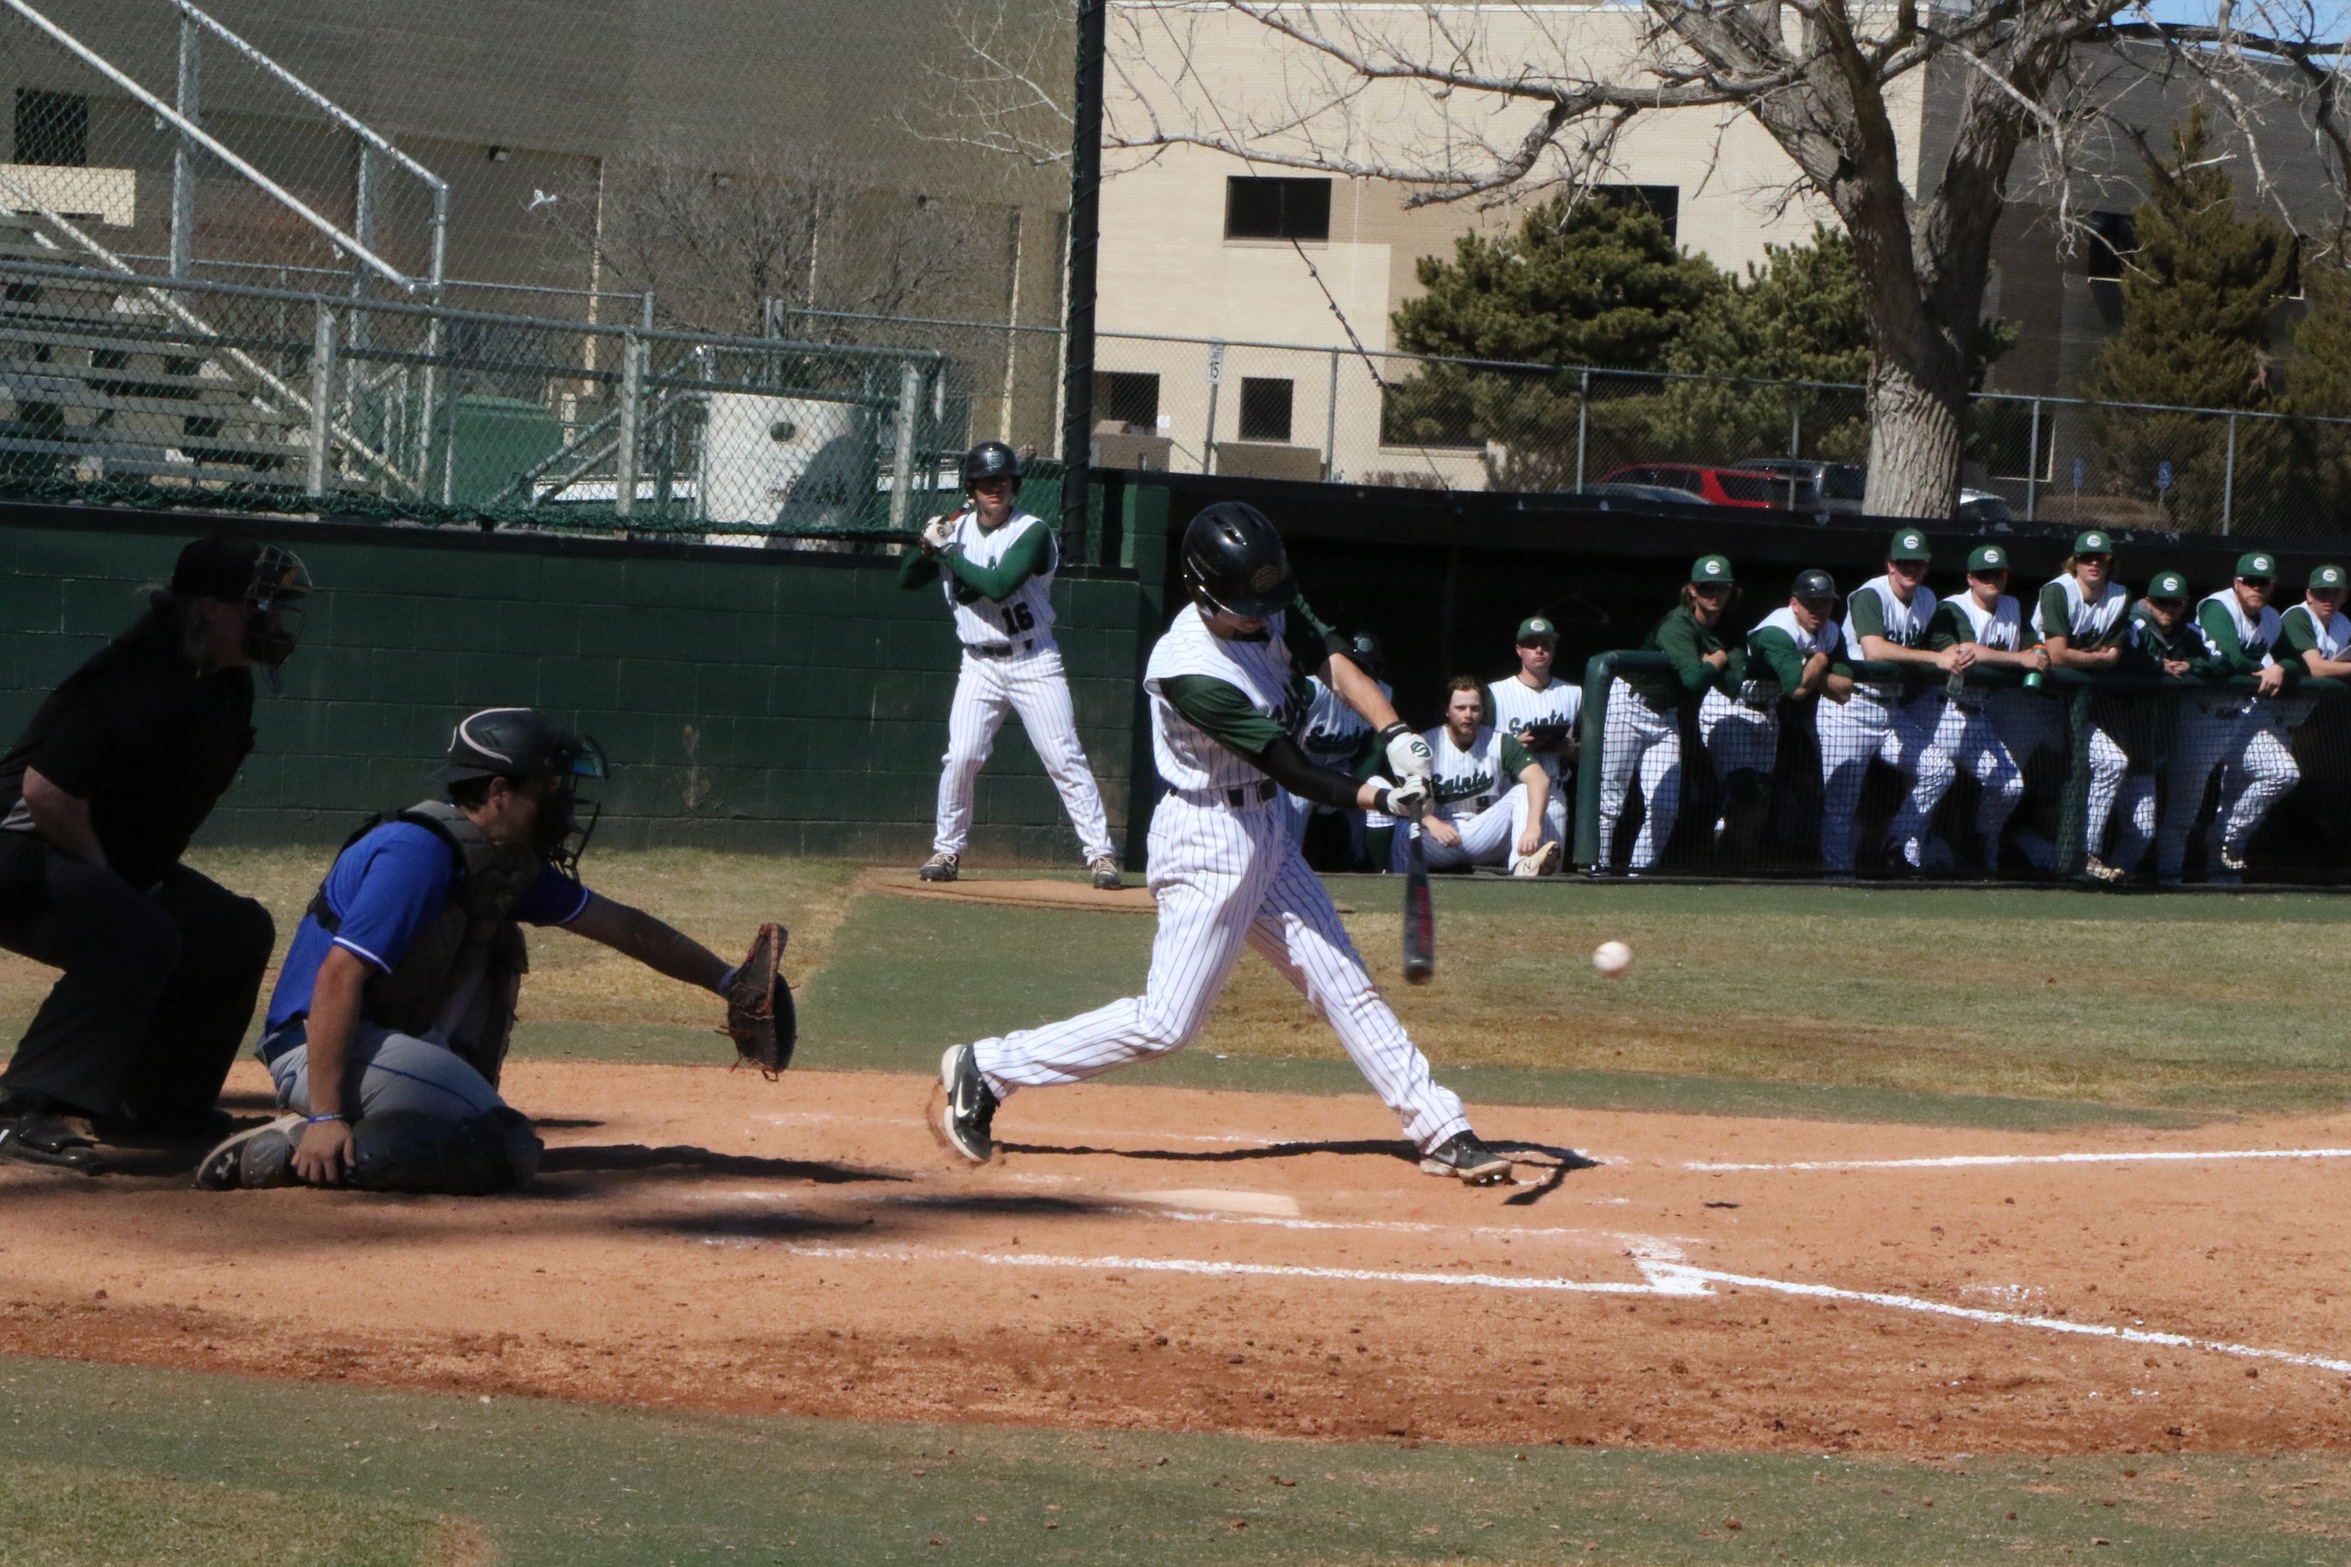 The Saints fell to Vernon College 13-2